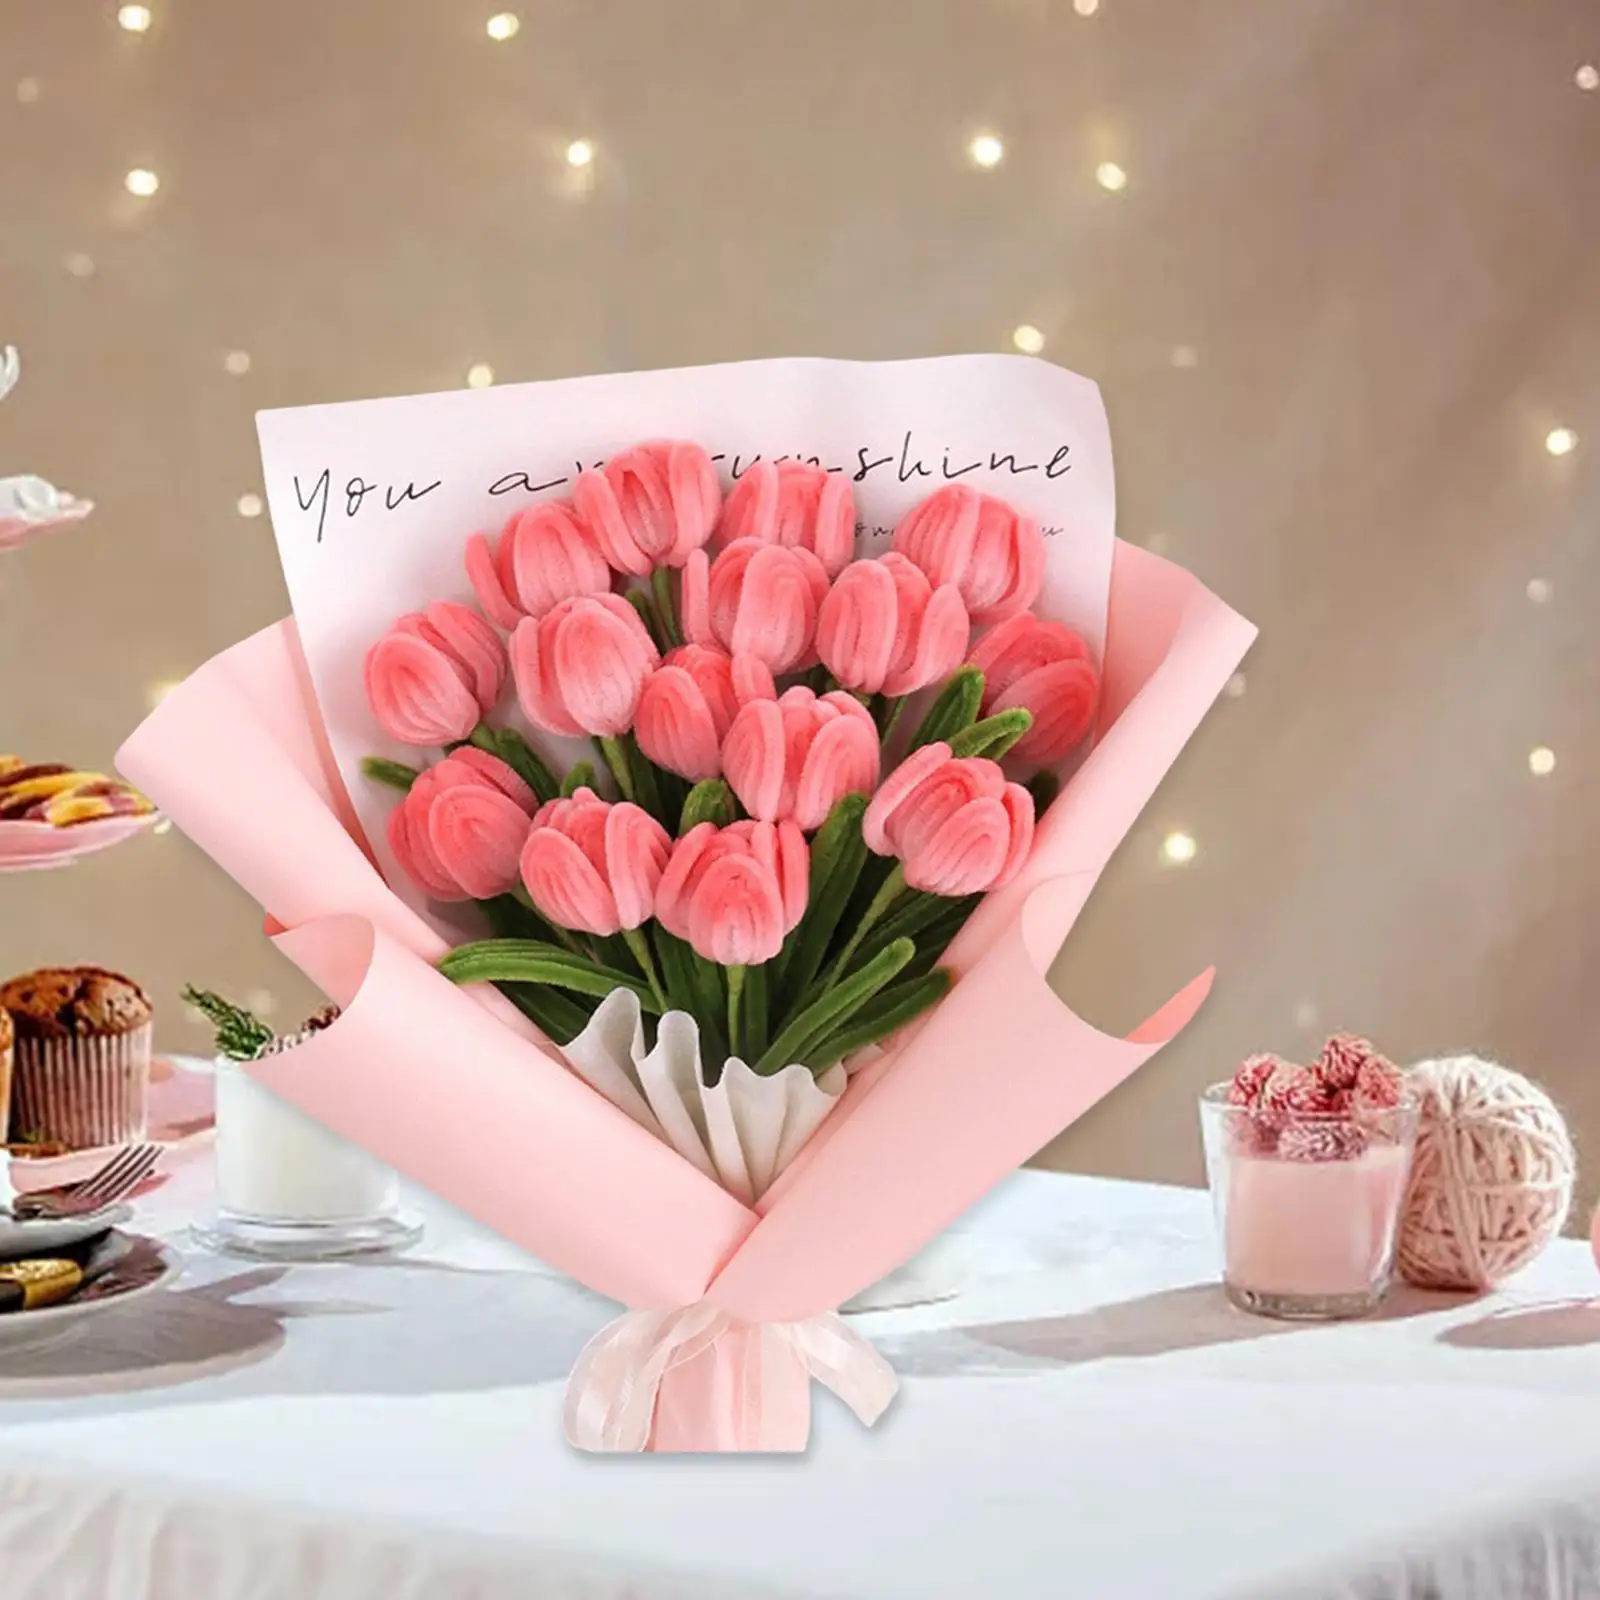 DIY Plush Simulation Flowers Tulip Bouquet Table Bouquet Centerpiece Handmade Flowers with Floral Wrapping Paper